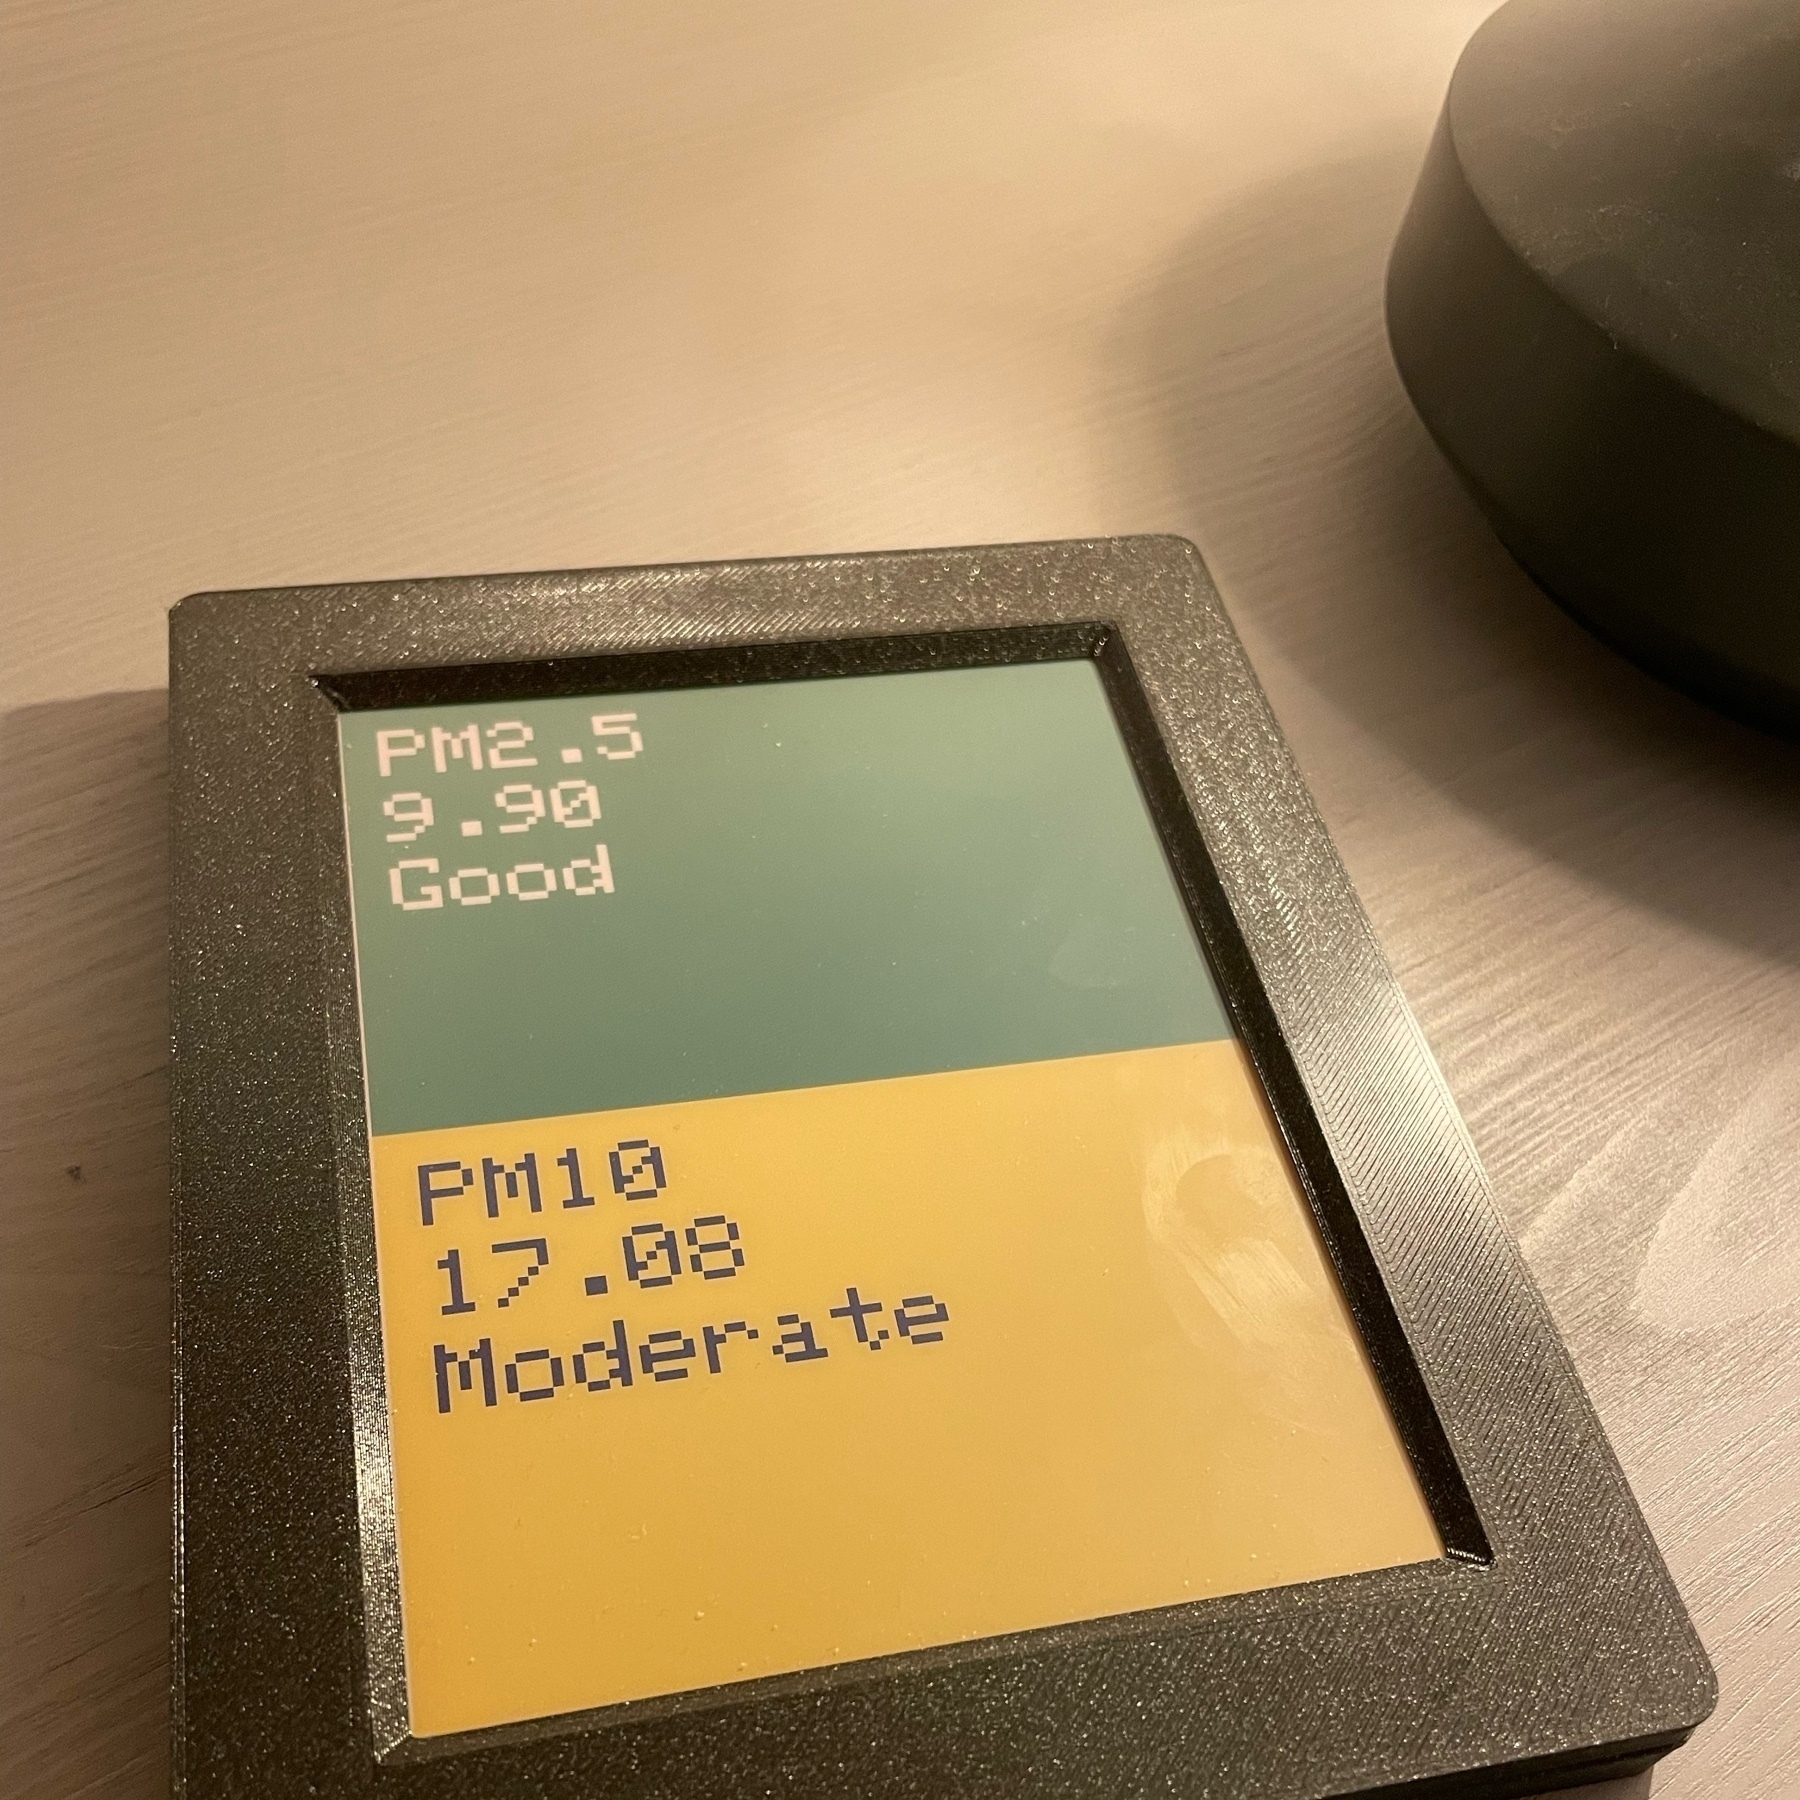 small e-ink tablet. top half of the screen says on green background PM2.5/9.90/Good. lower half has on yellow background PM10/17.08/Moderate. 